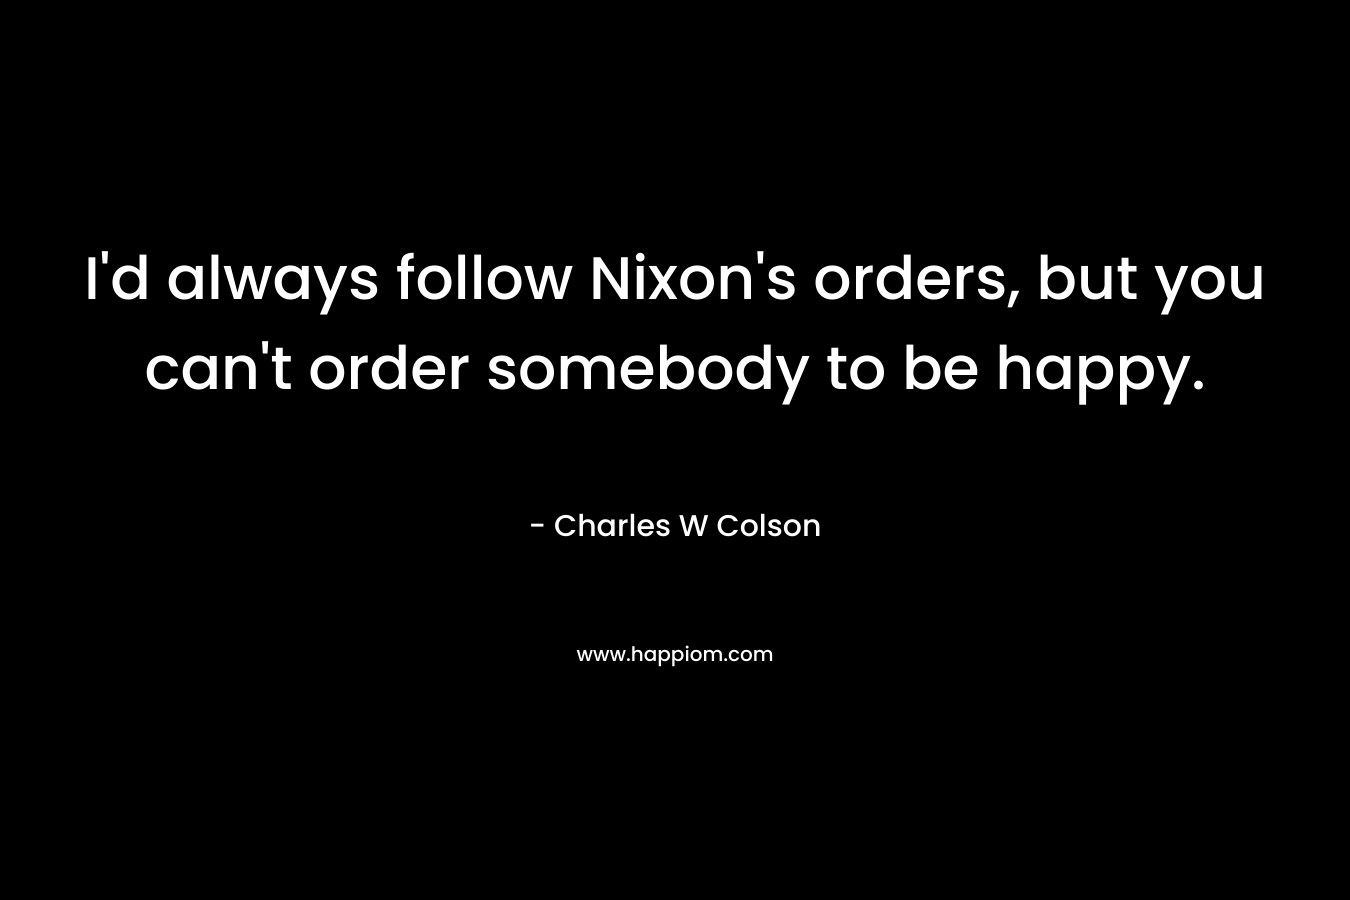 I'd always follow Nixon's orders, but you can't order somebody to be happy.